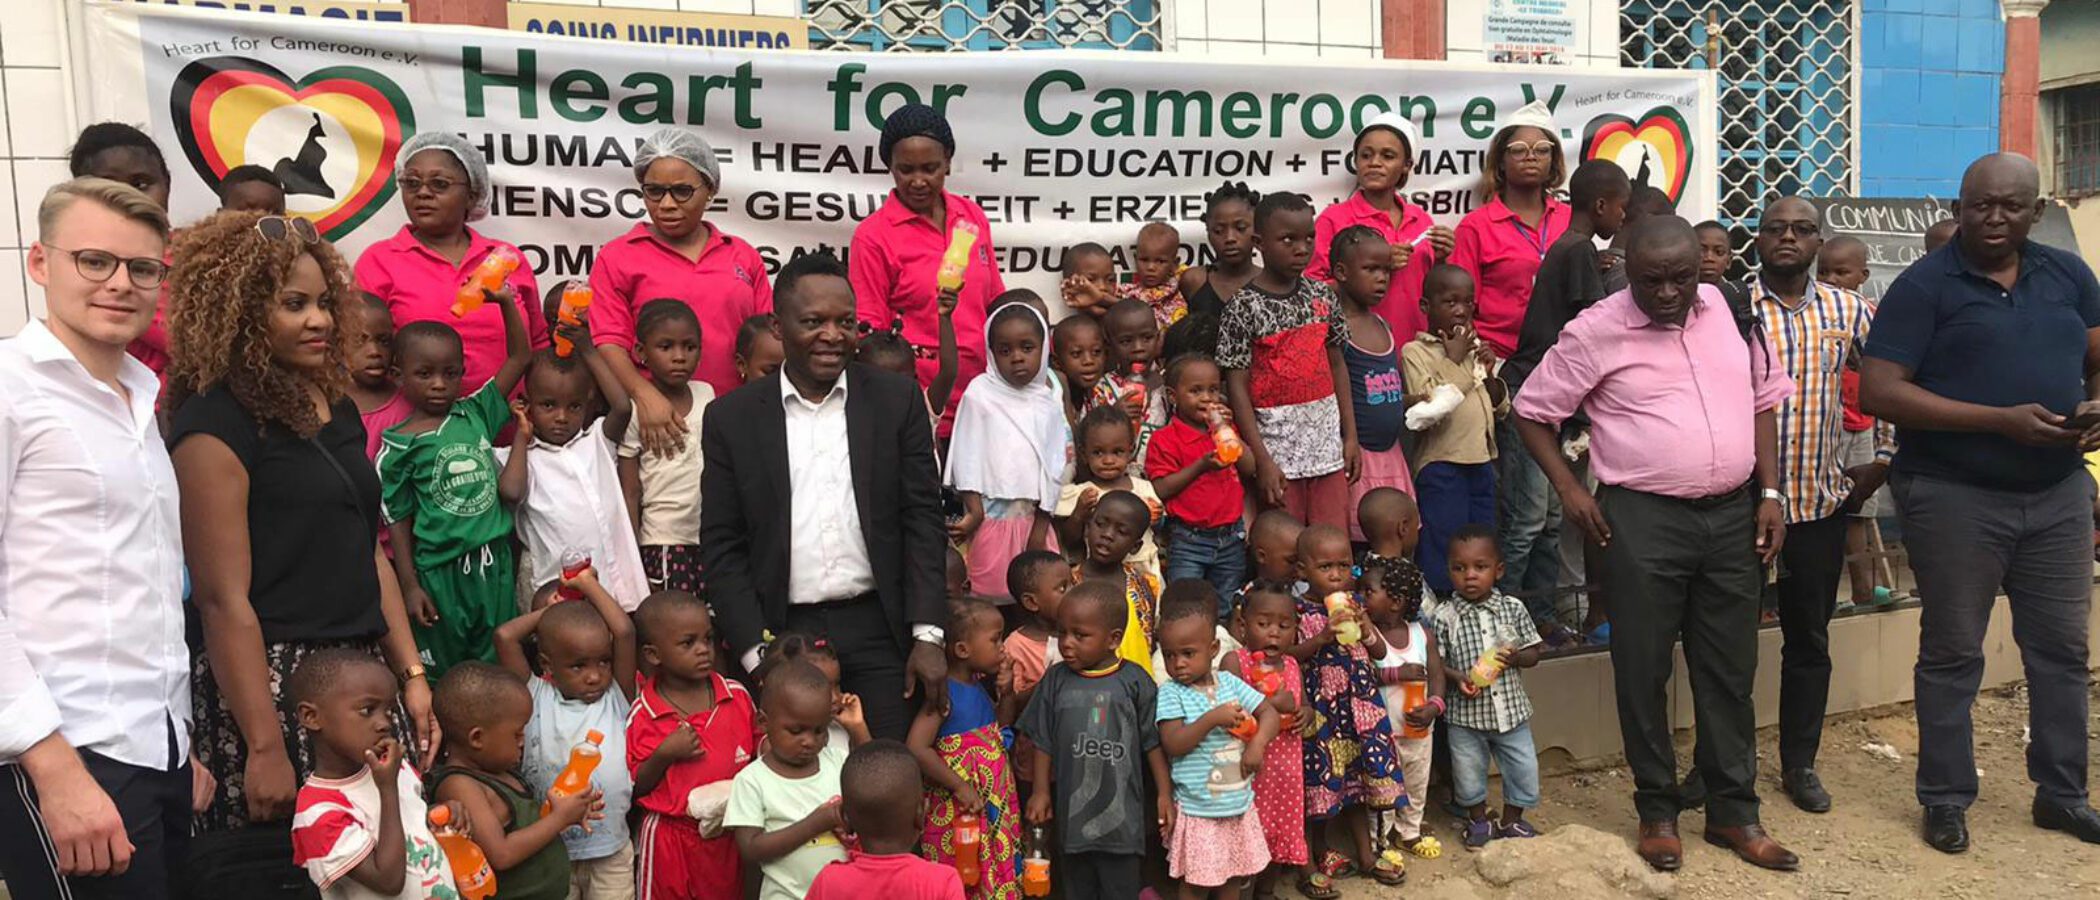 Heart for Cameroon